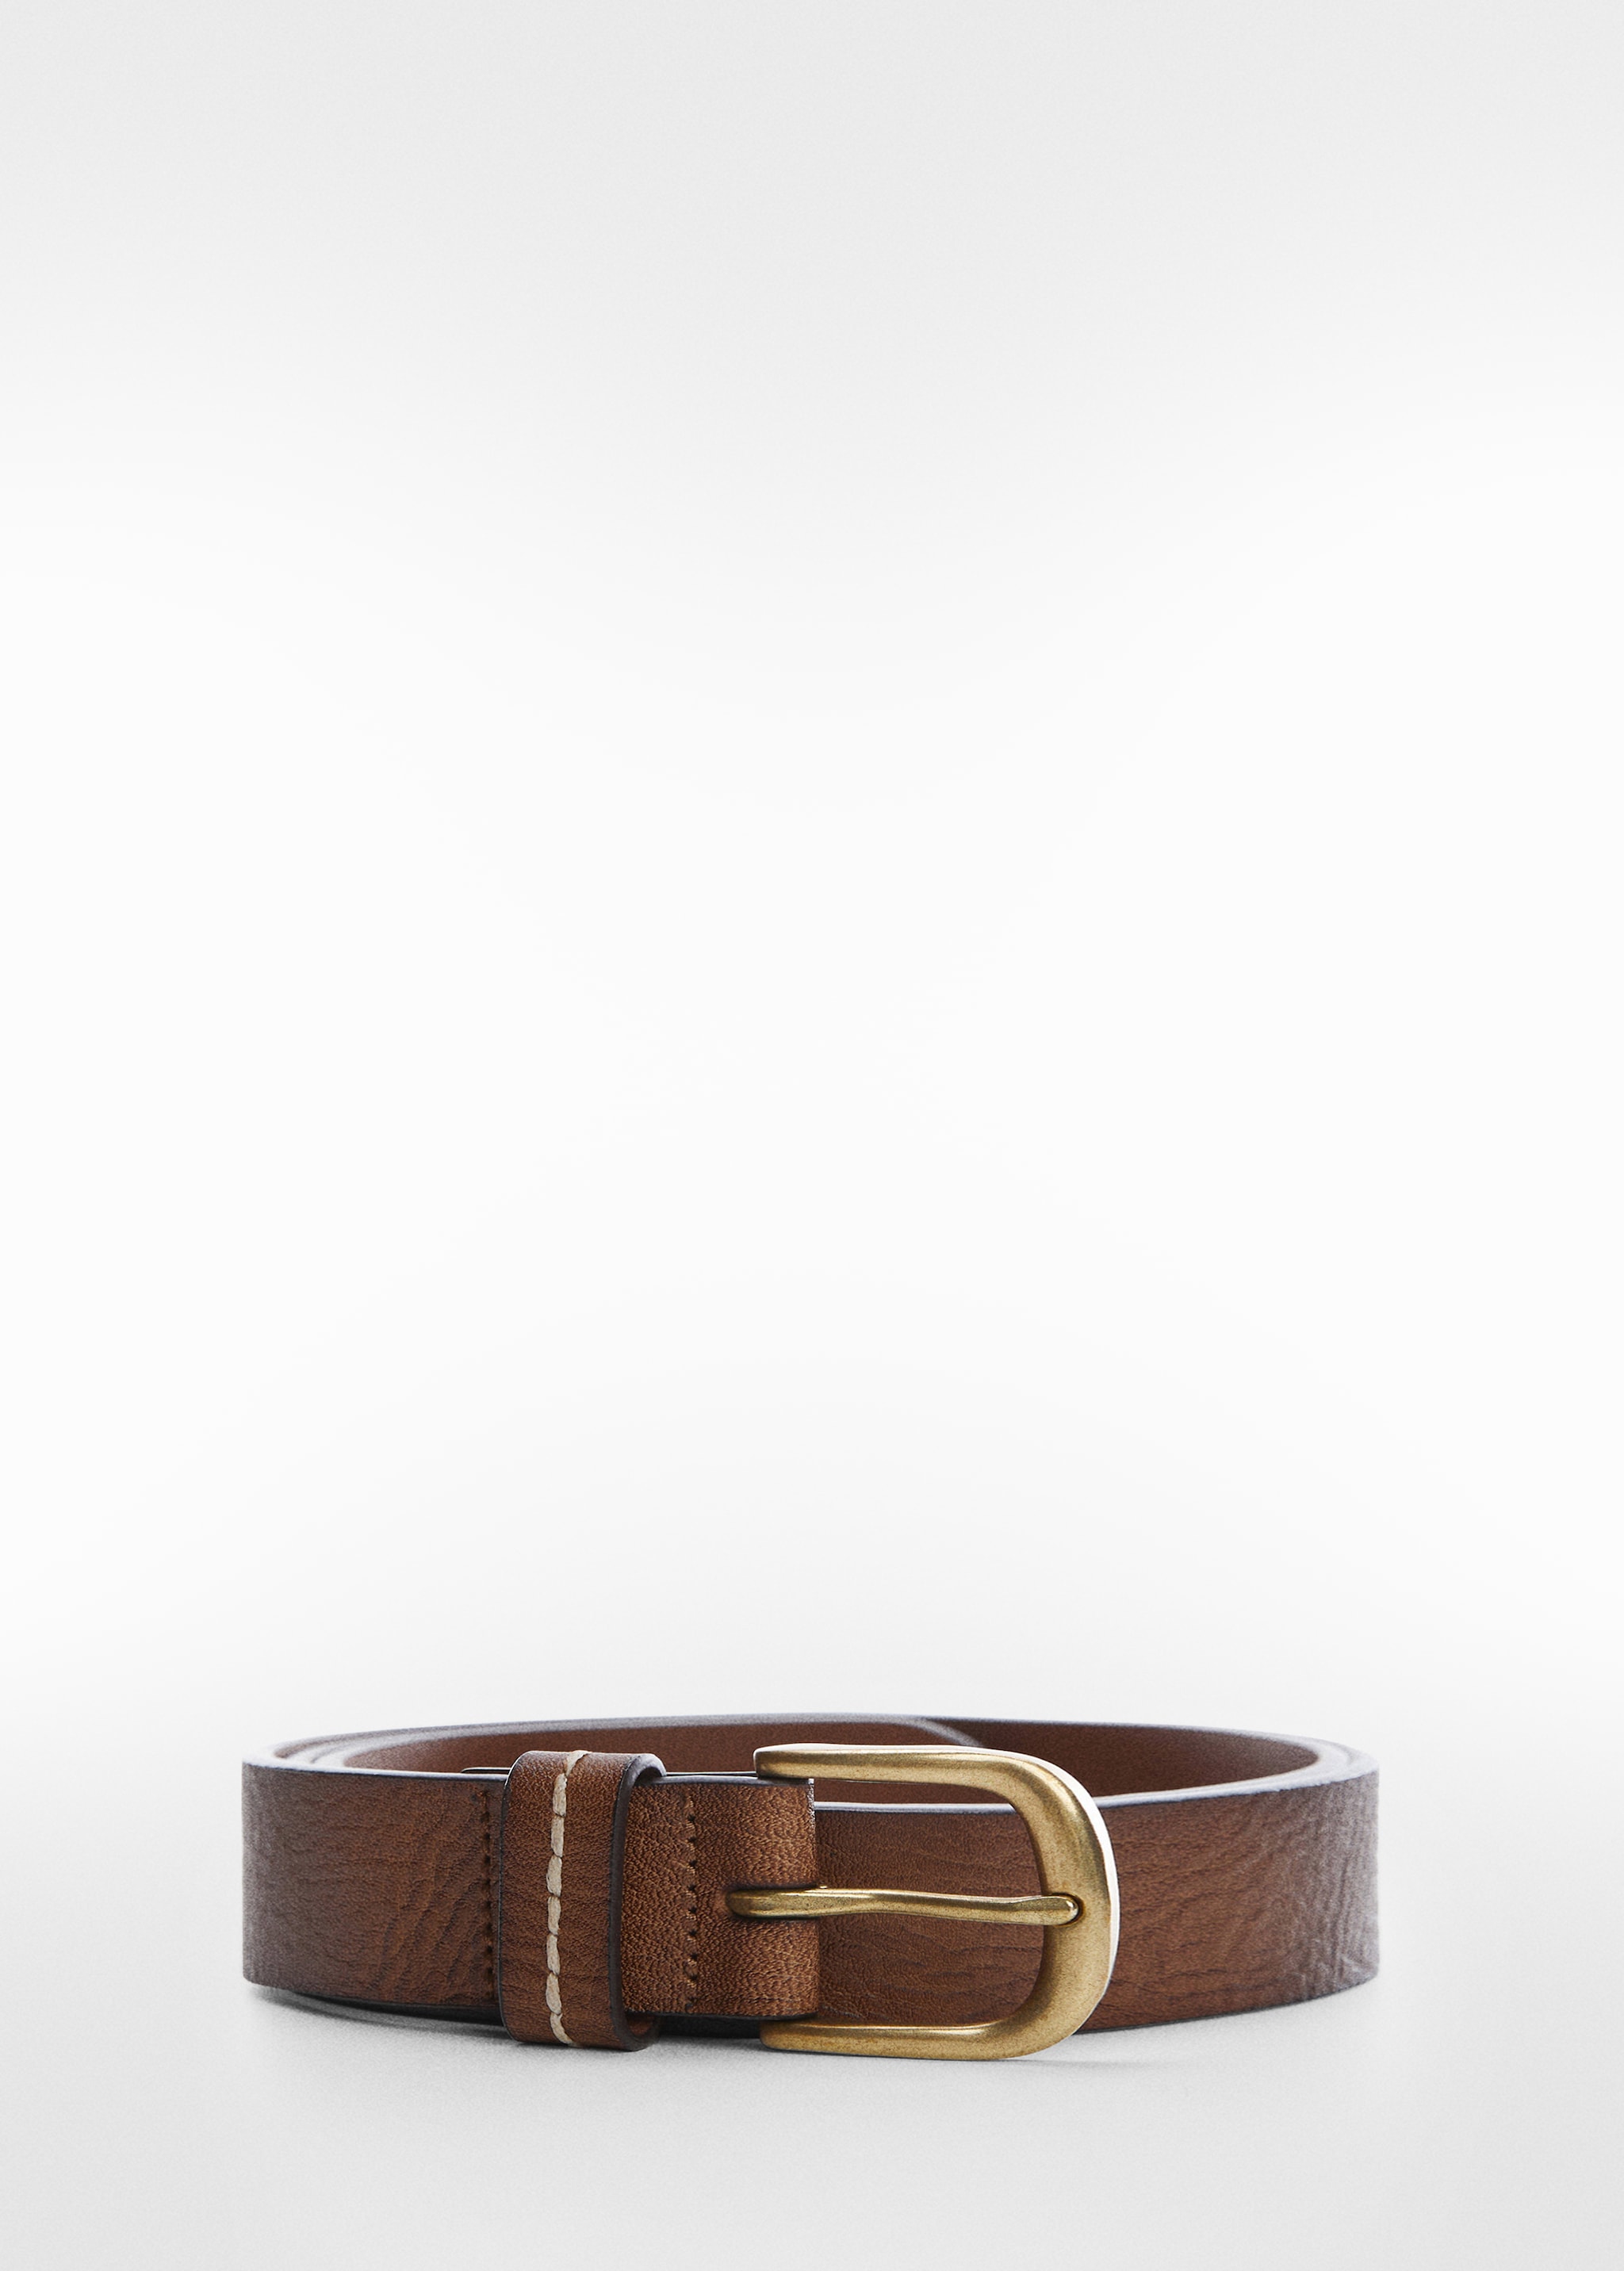 Pebbled leather belt - Article without model